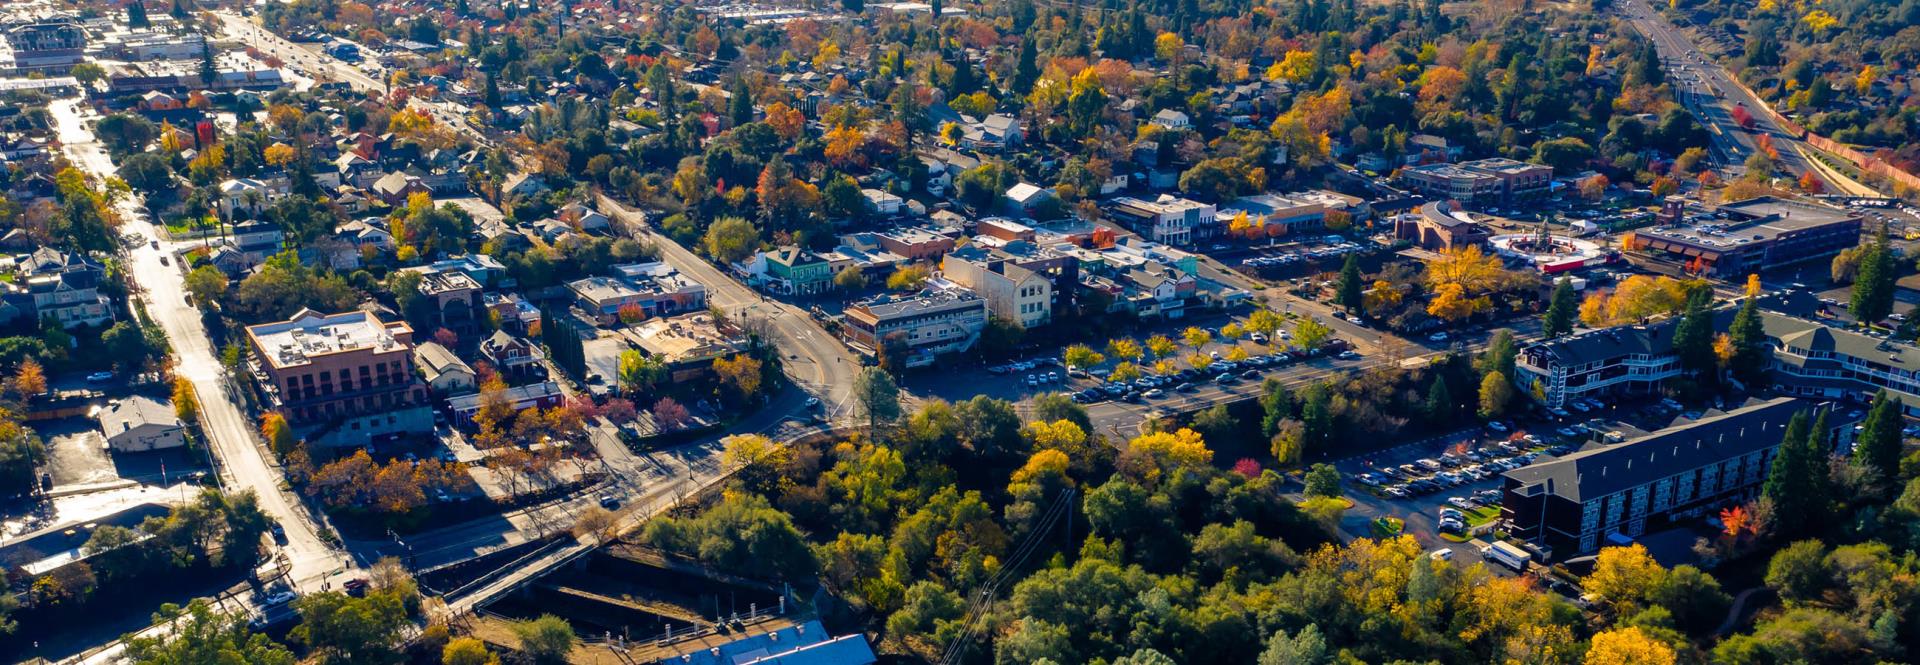 Aerial of the Folsom Historic District